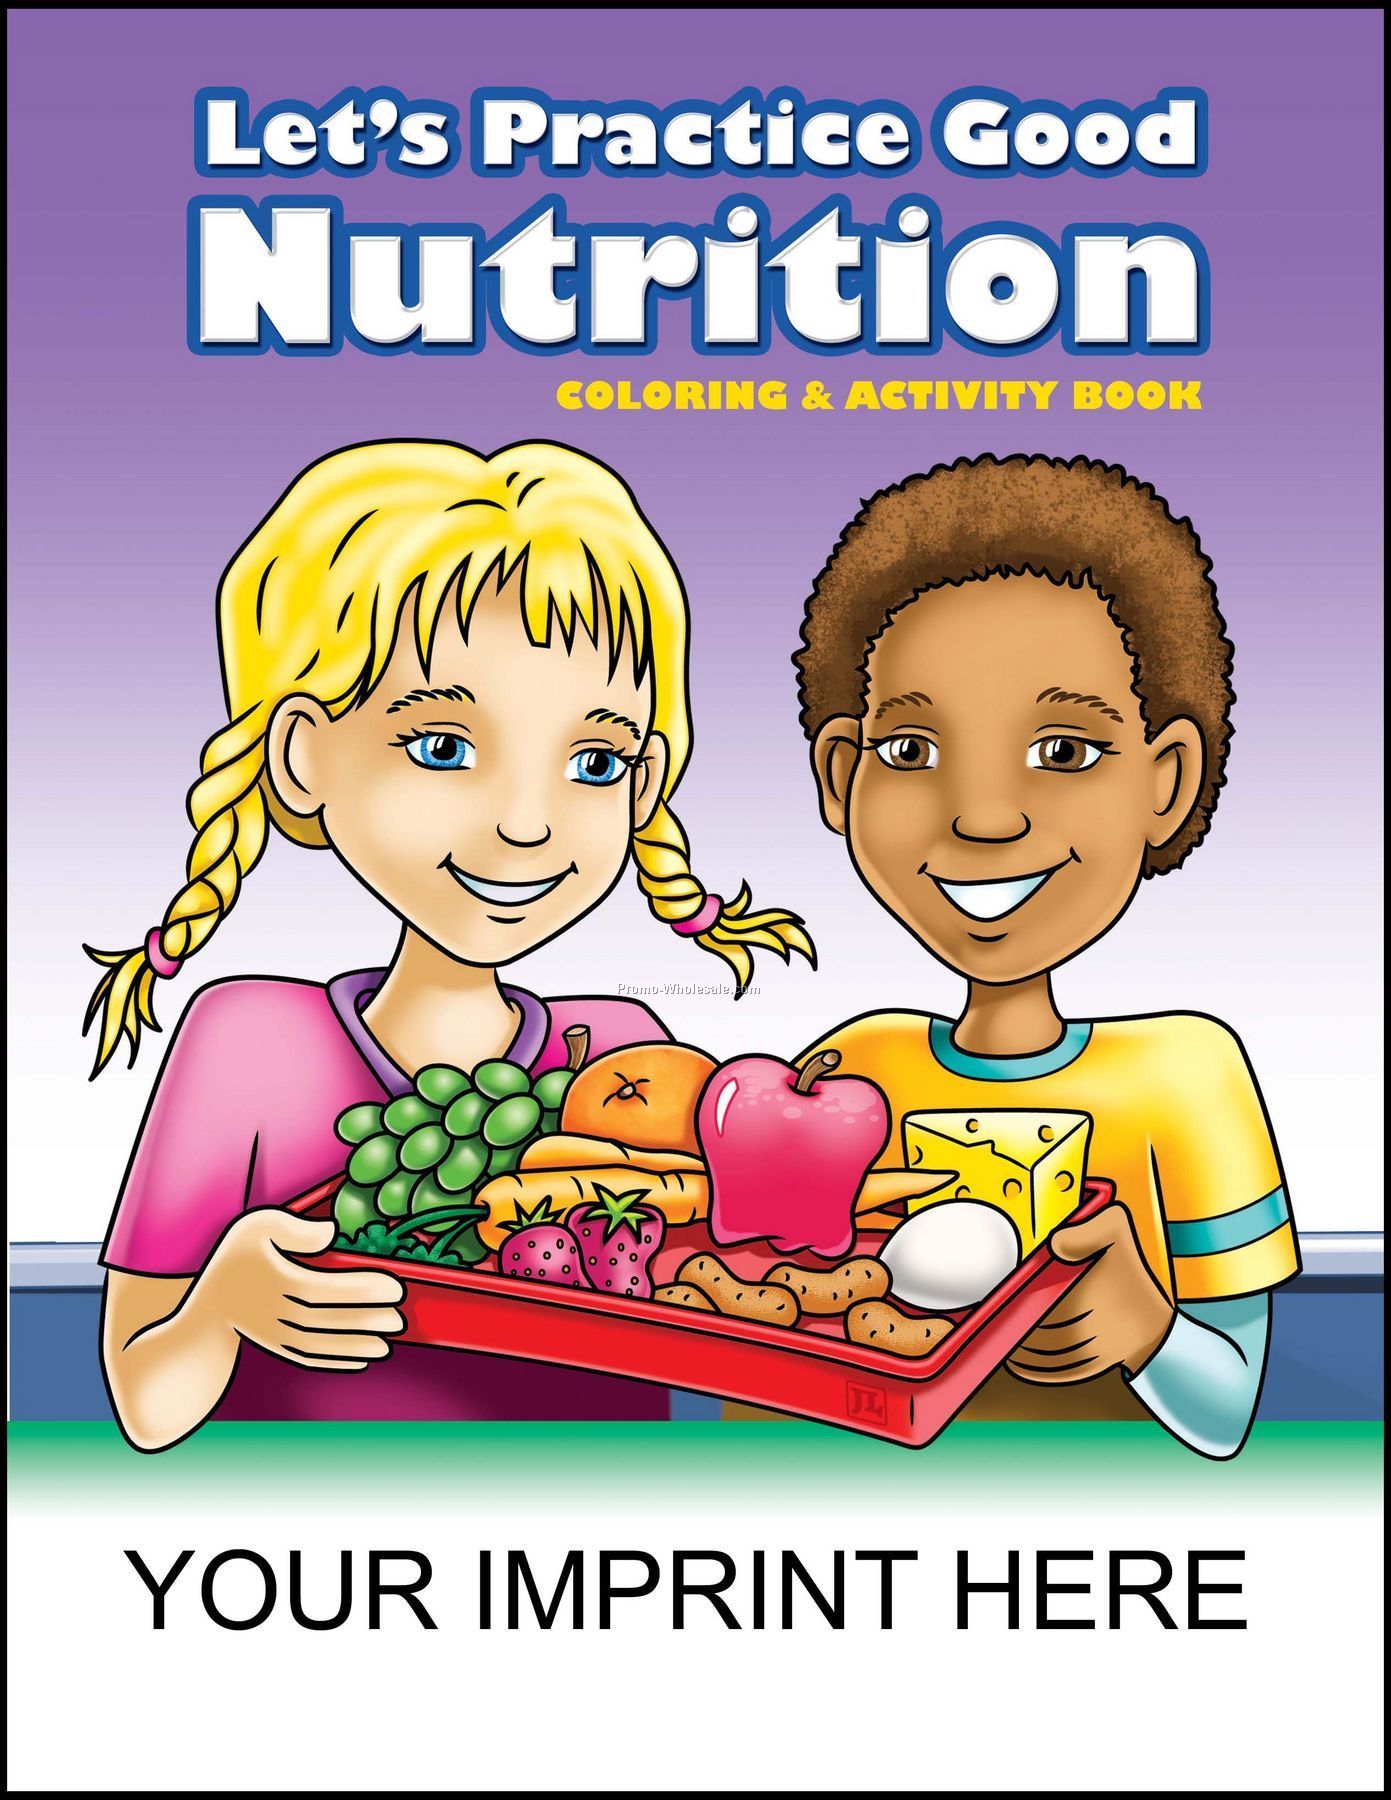 8-3/8"x10-7/8" Lets Practice Good Nutrition Coloring & Activity Book